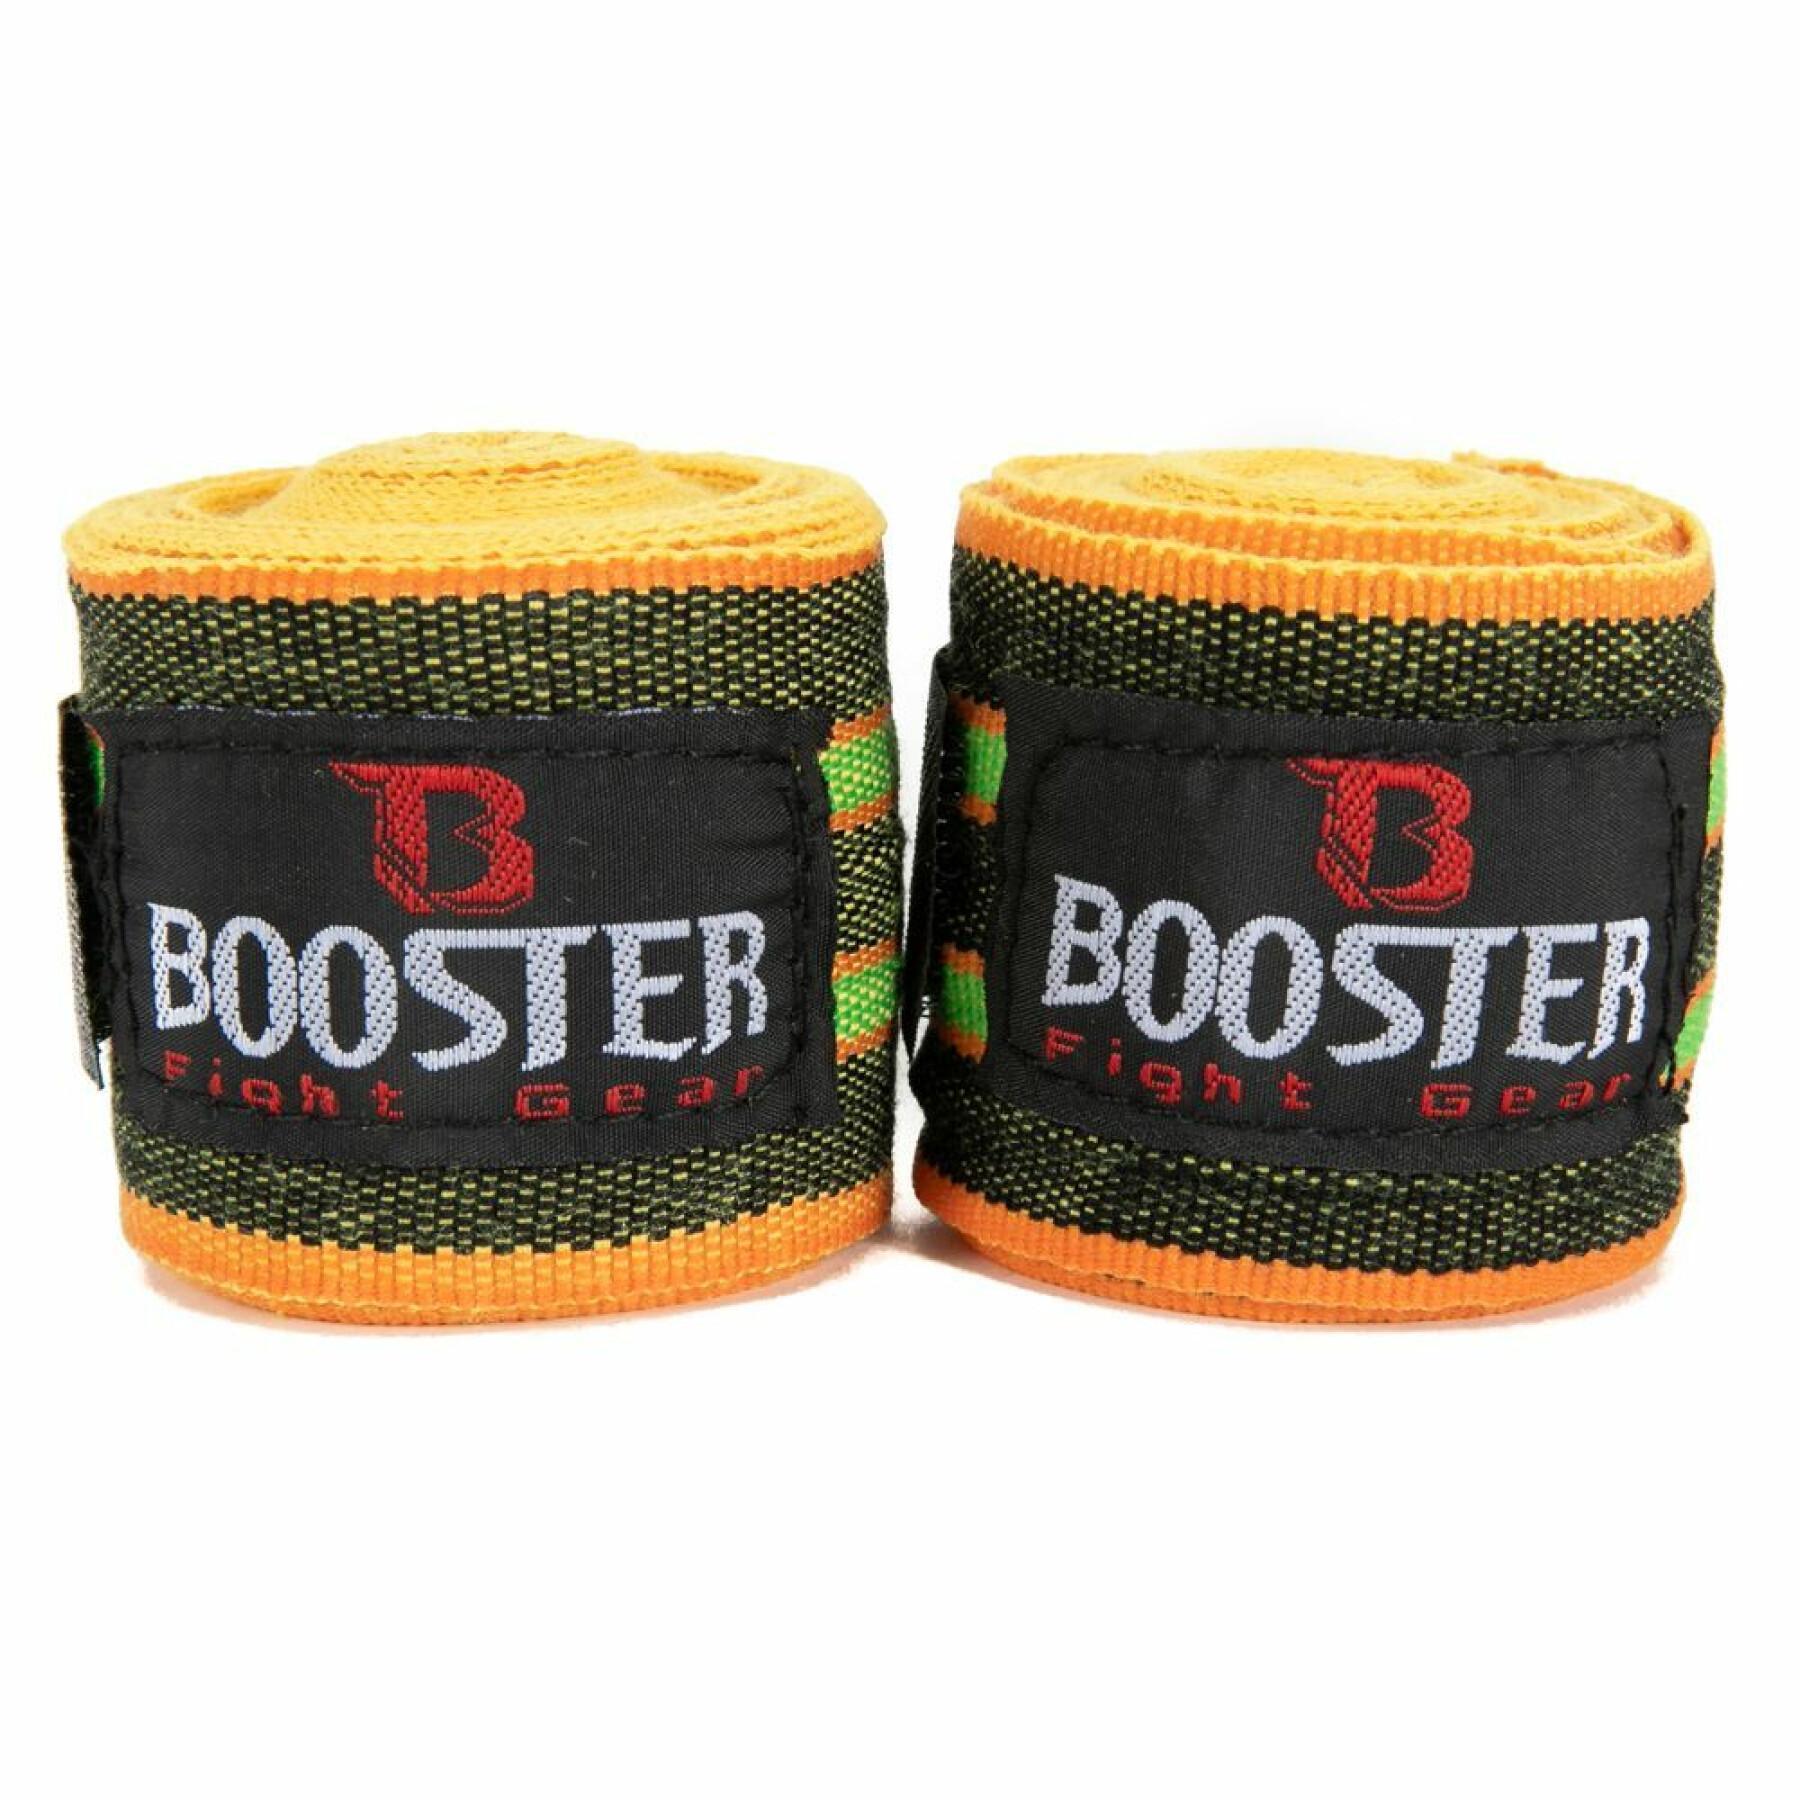 Boxing Bands Booster Fight Gear Bpc Retro 6